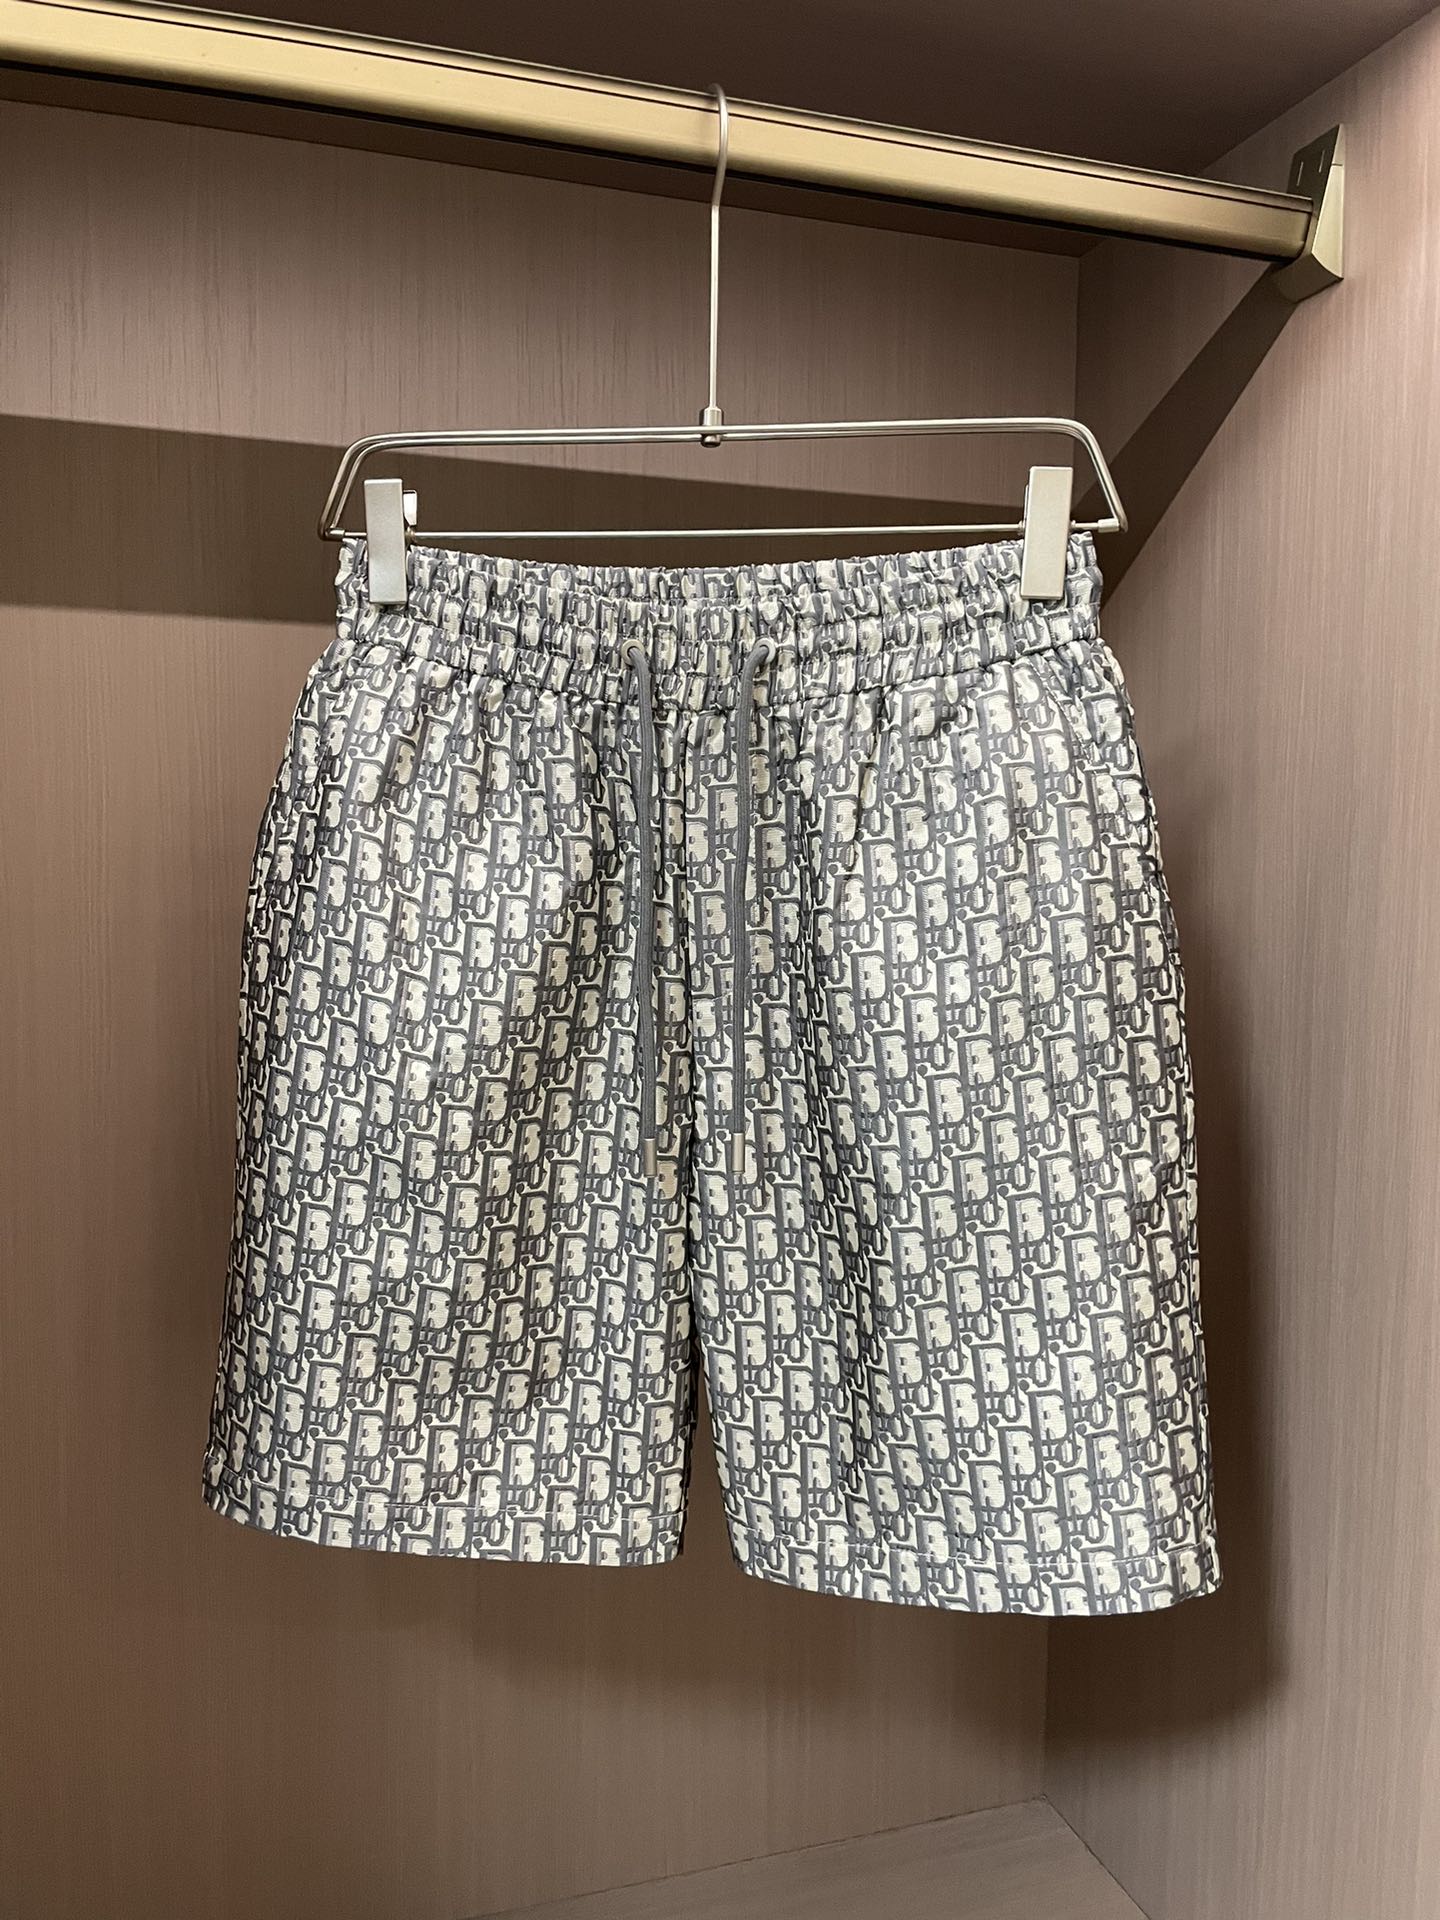 Dior Clothing Shorts Only sell high-quality
 Unisex Summer Collection Beach